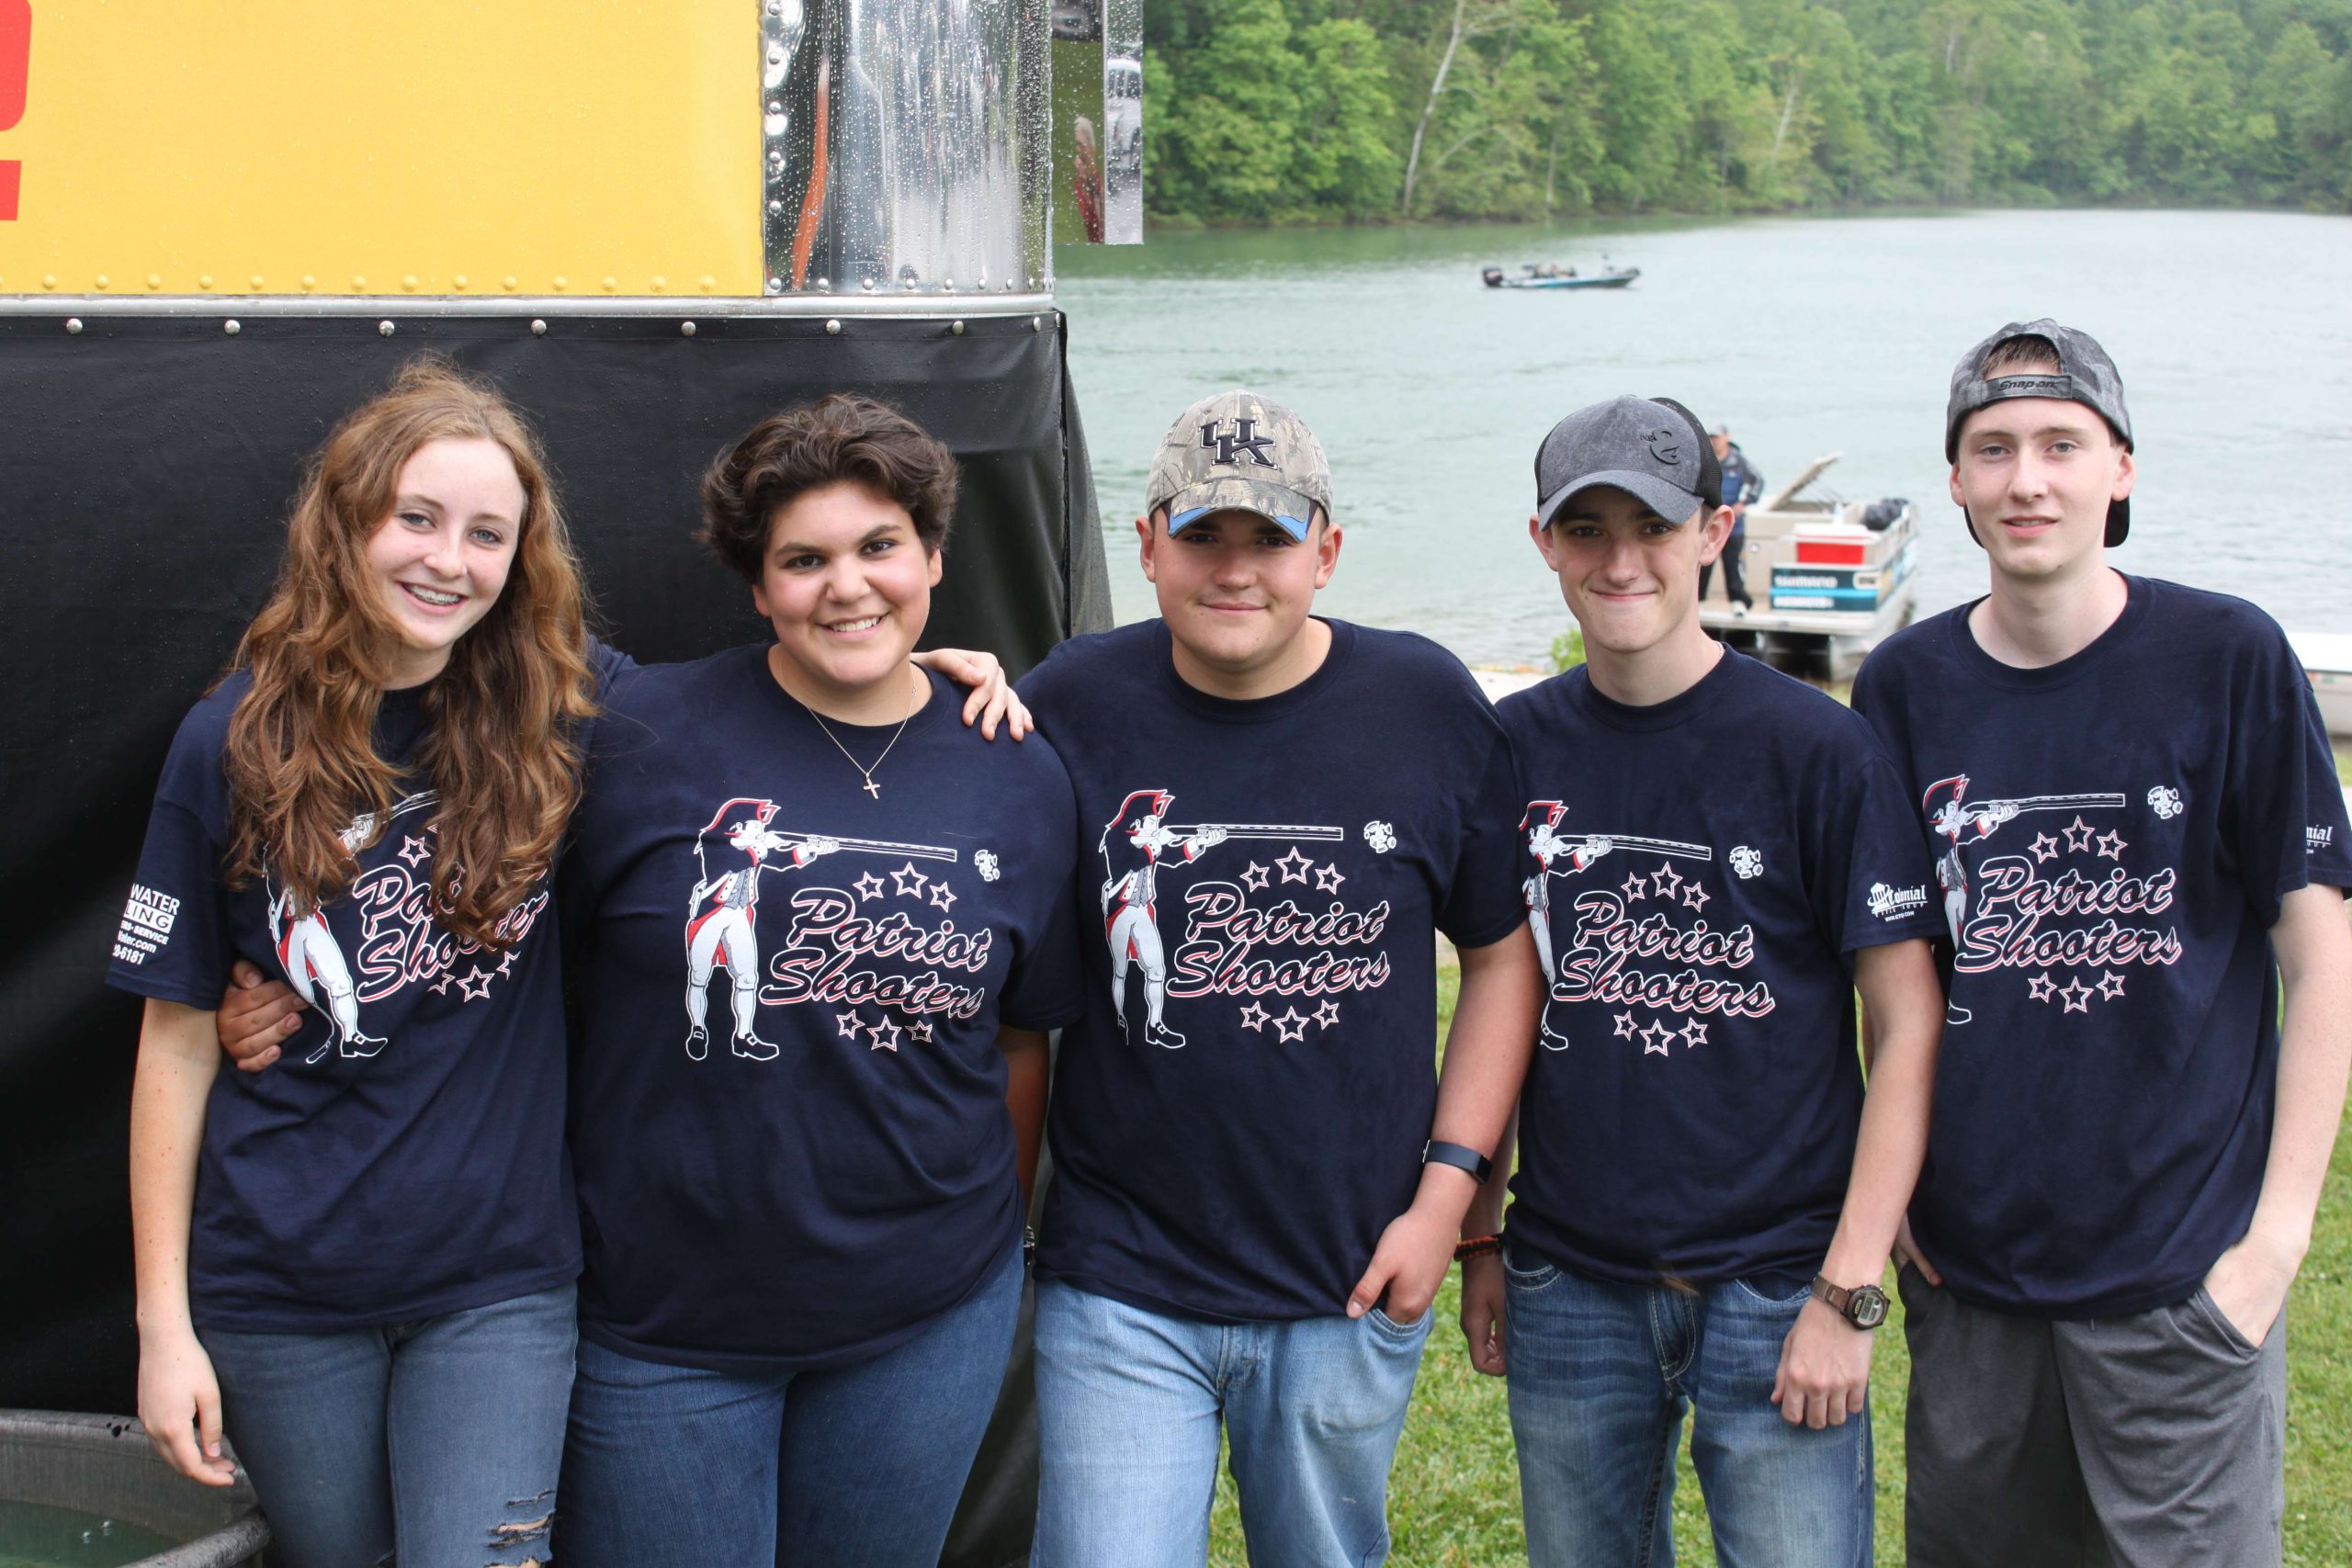 Weldon and the B.A.S.S. staff have plenty of volunteer help at the event too. Pictured are members of the Patriot Shooters, a trap shooting team composed of high school students from throughout Jefferson County, Tenn.